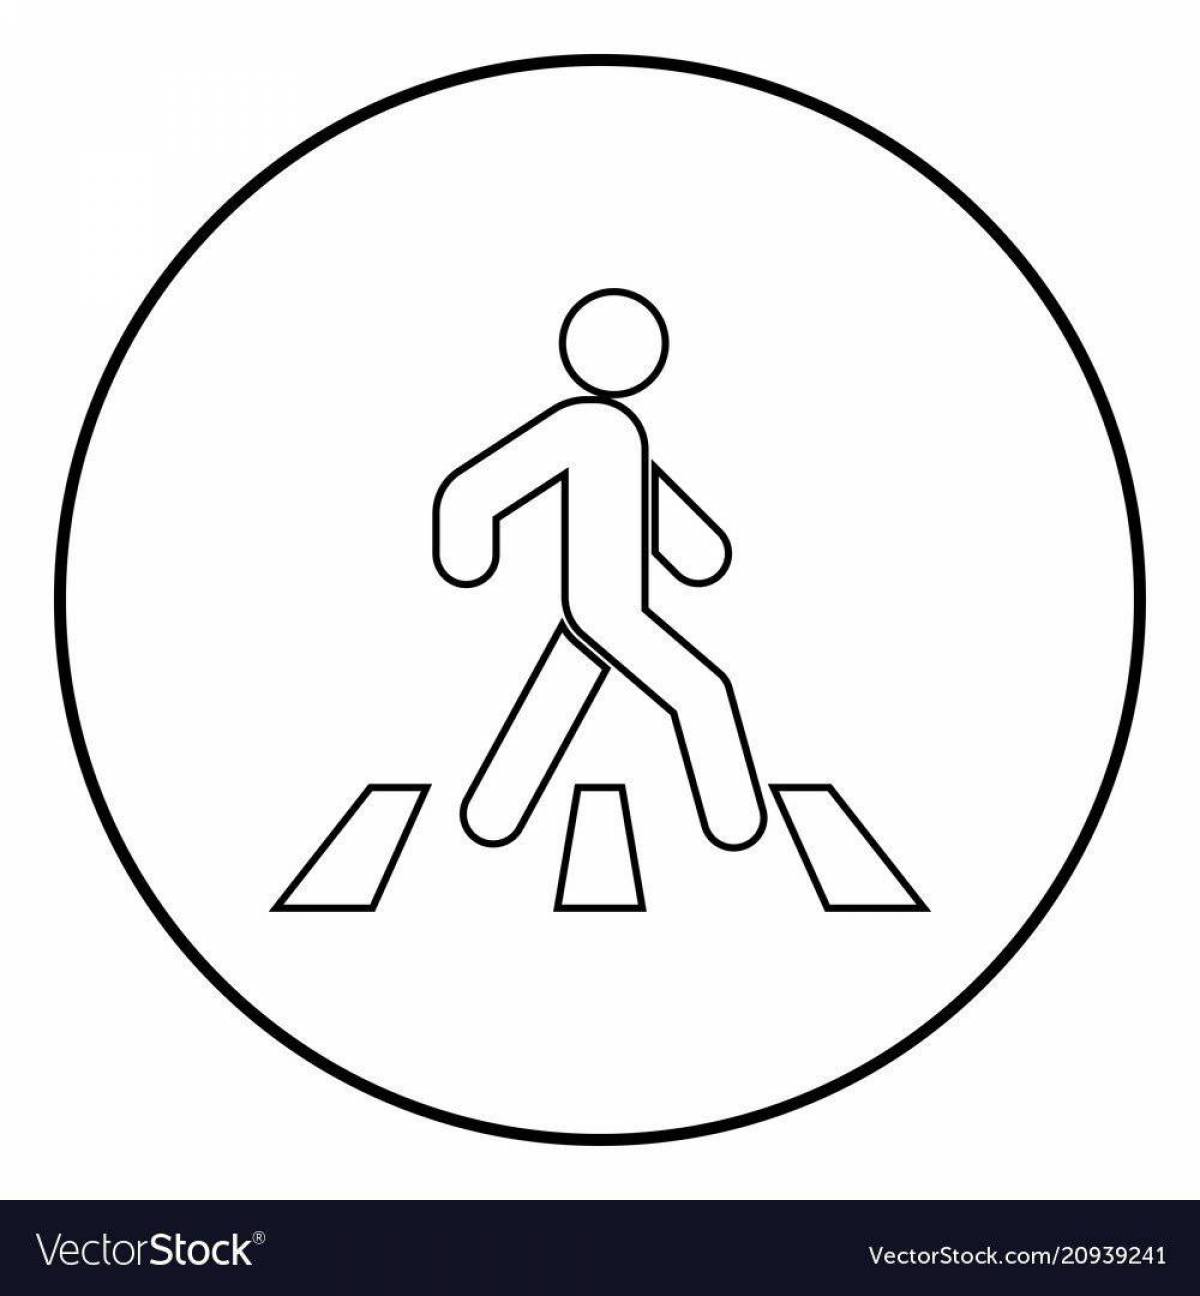 Playful crosswalk coloring page